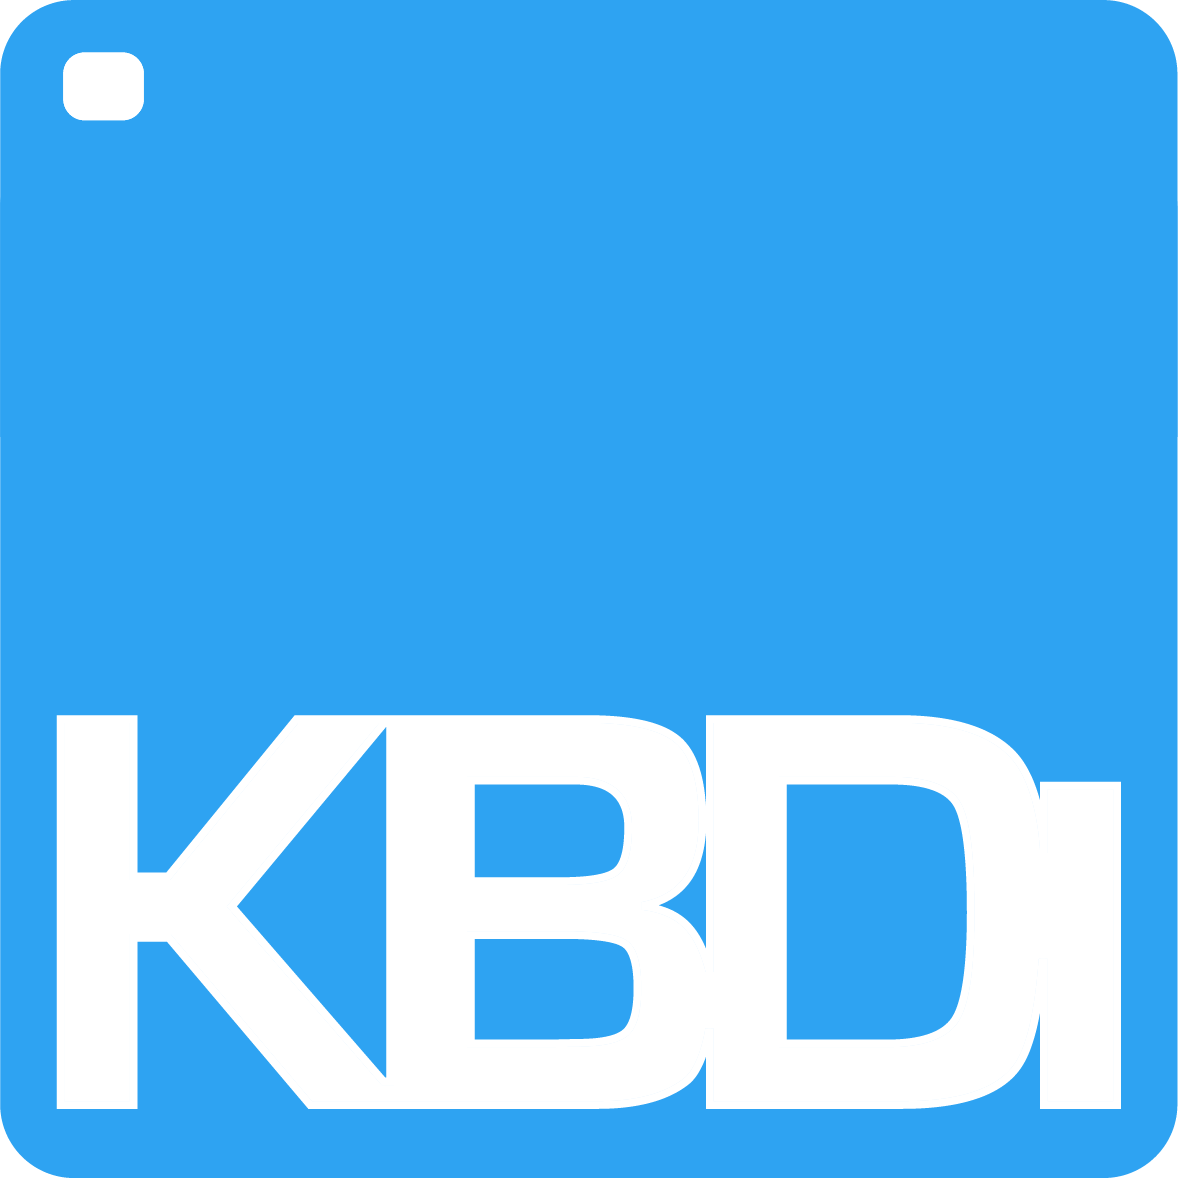 Accredited member of the KBDI